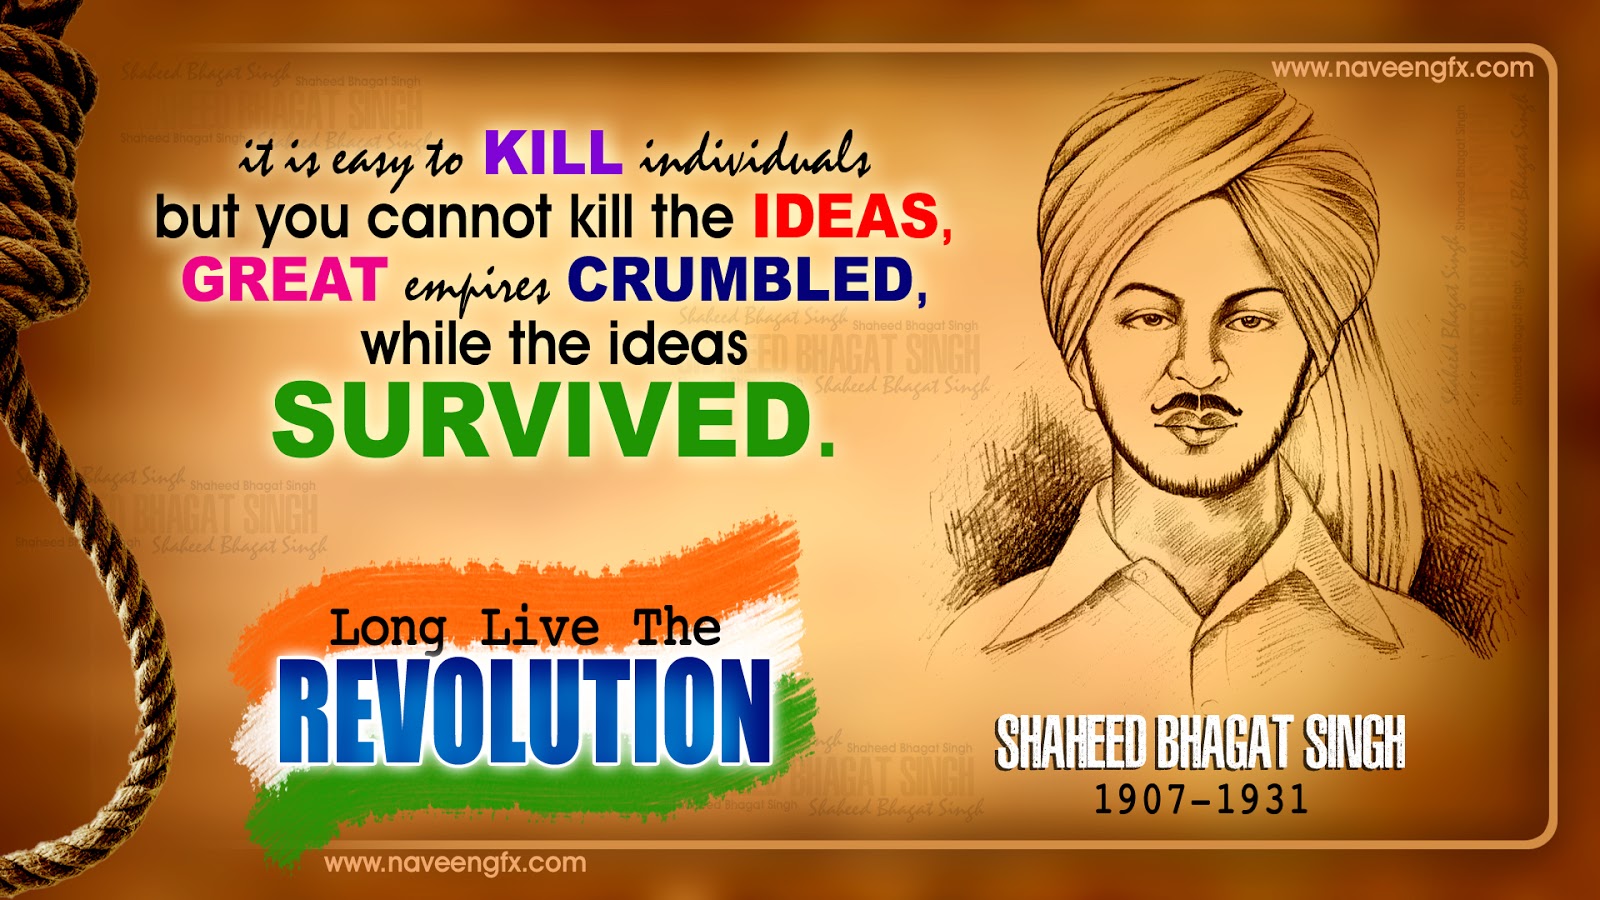 Bhagat singh motivational poster quotes and wallpapers | naveengfx